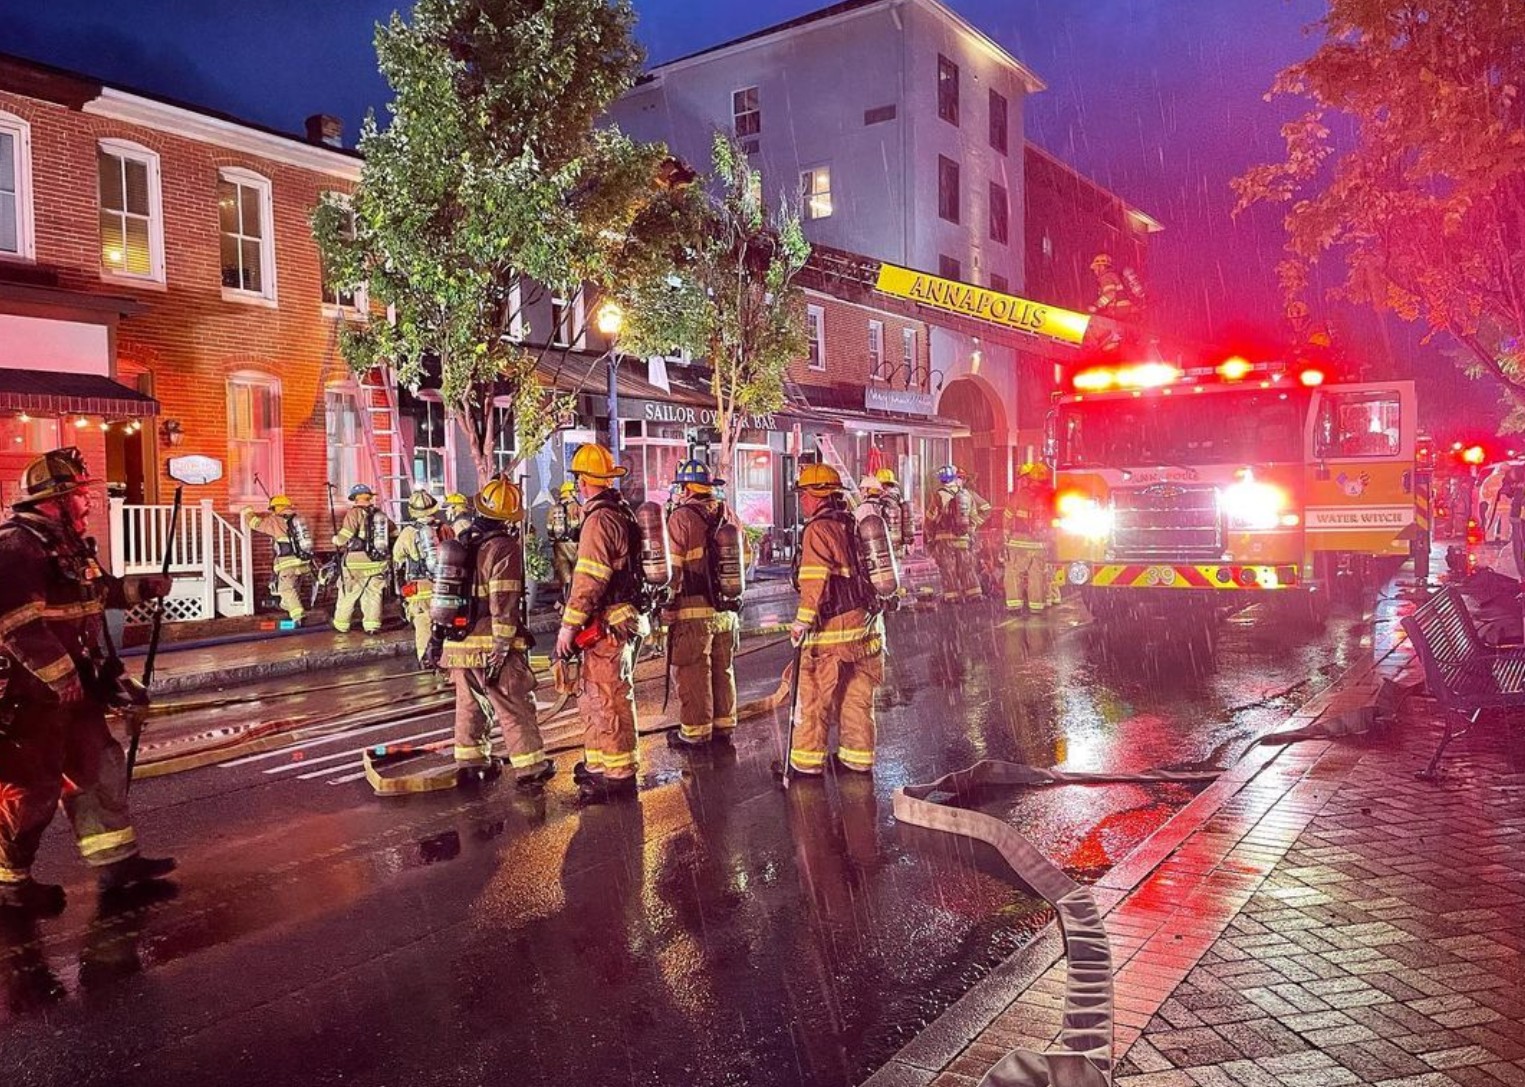 Popular Annapolis Oyster Bar Crippled by Fire